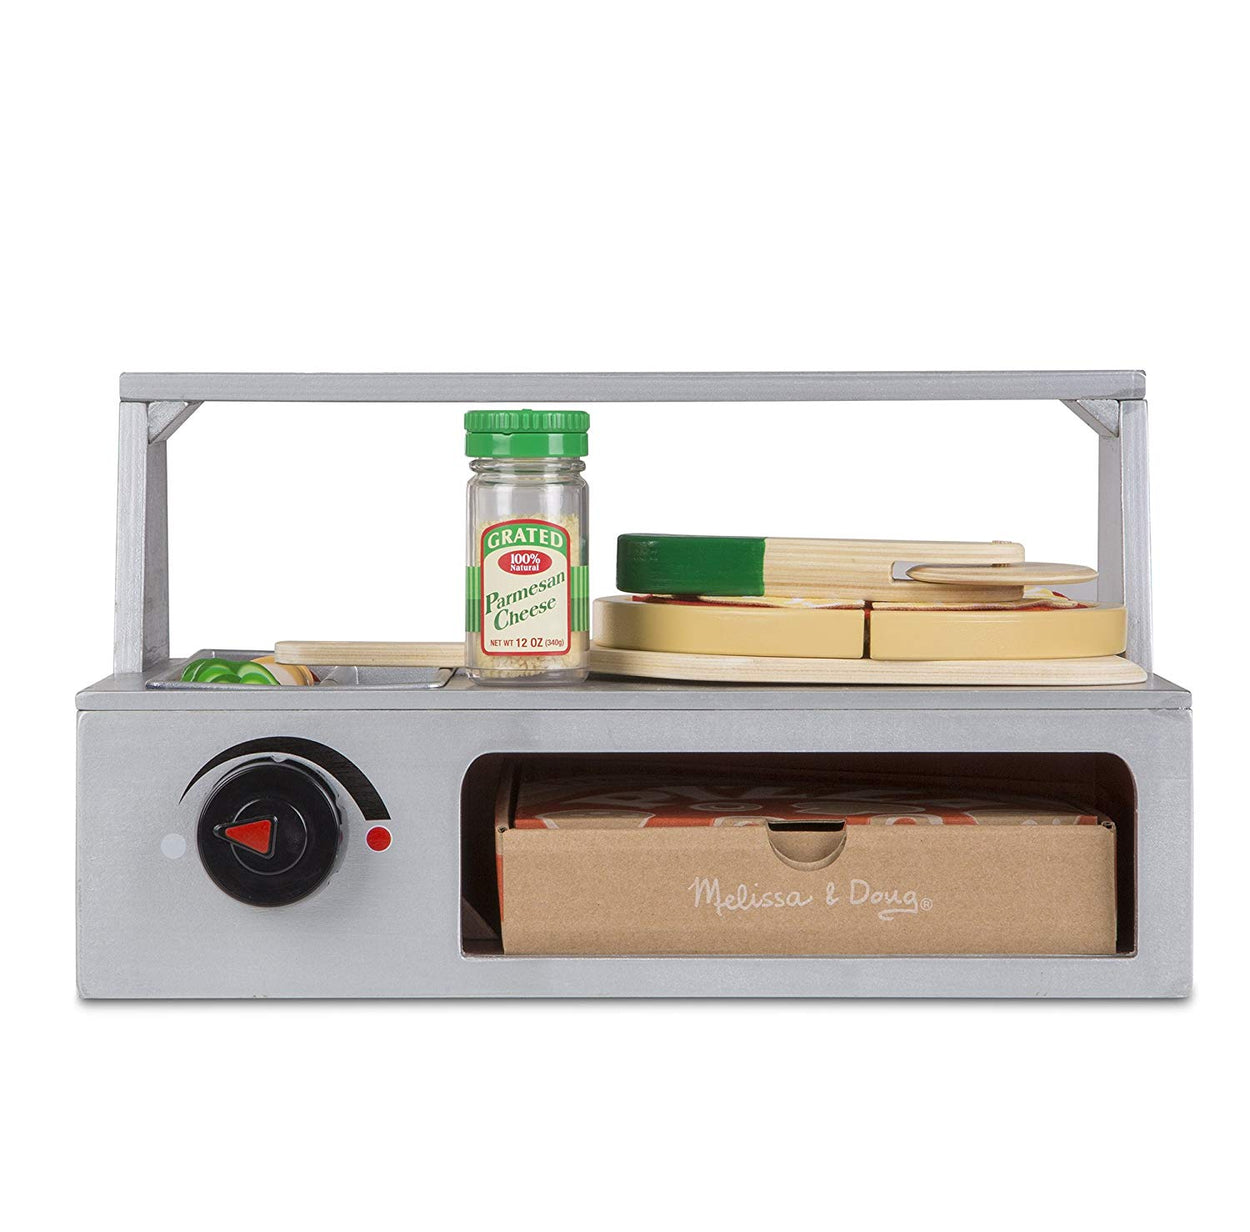  Pillowhale Wooden Toys Pizza Oven with Toppings &  Accessories,Wooden Pizza Counter Playset,Pretend Play Pizza Making Toy Set  for Kids Boys Girls 3+ : Toys & Games